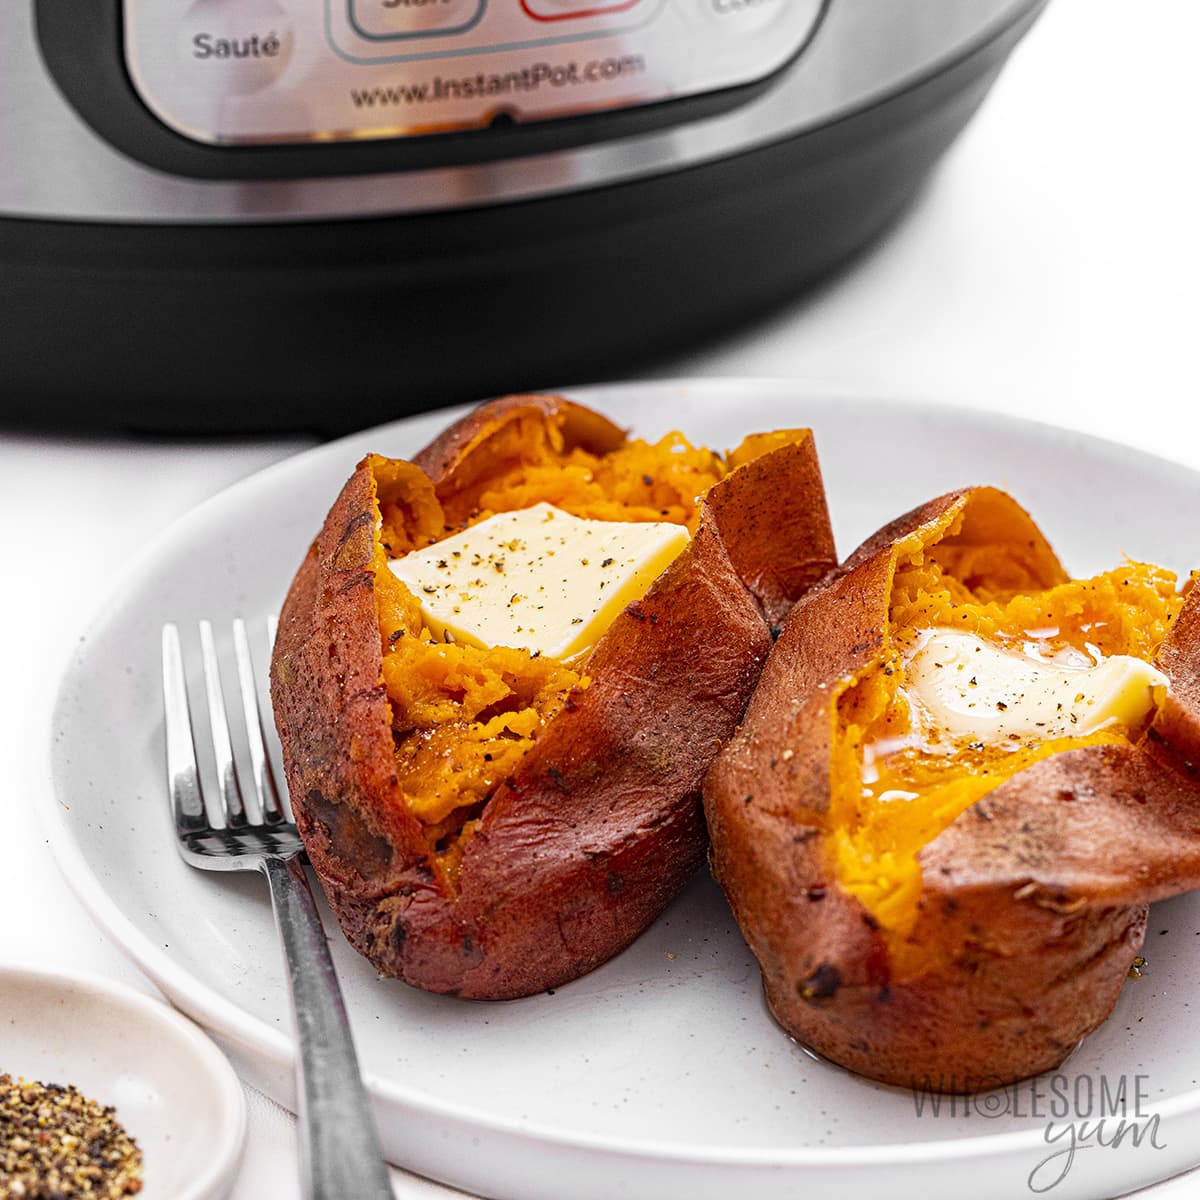 There are two ingredients for Instant Pot Sweet Potatoes.